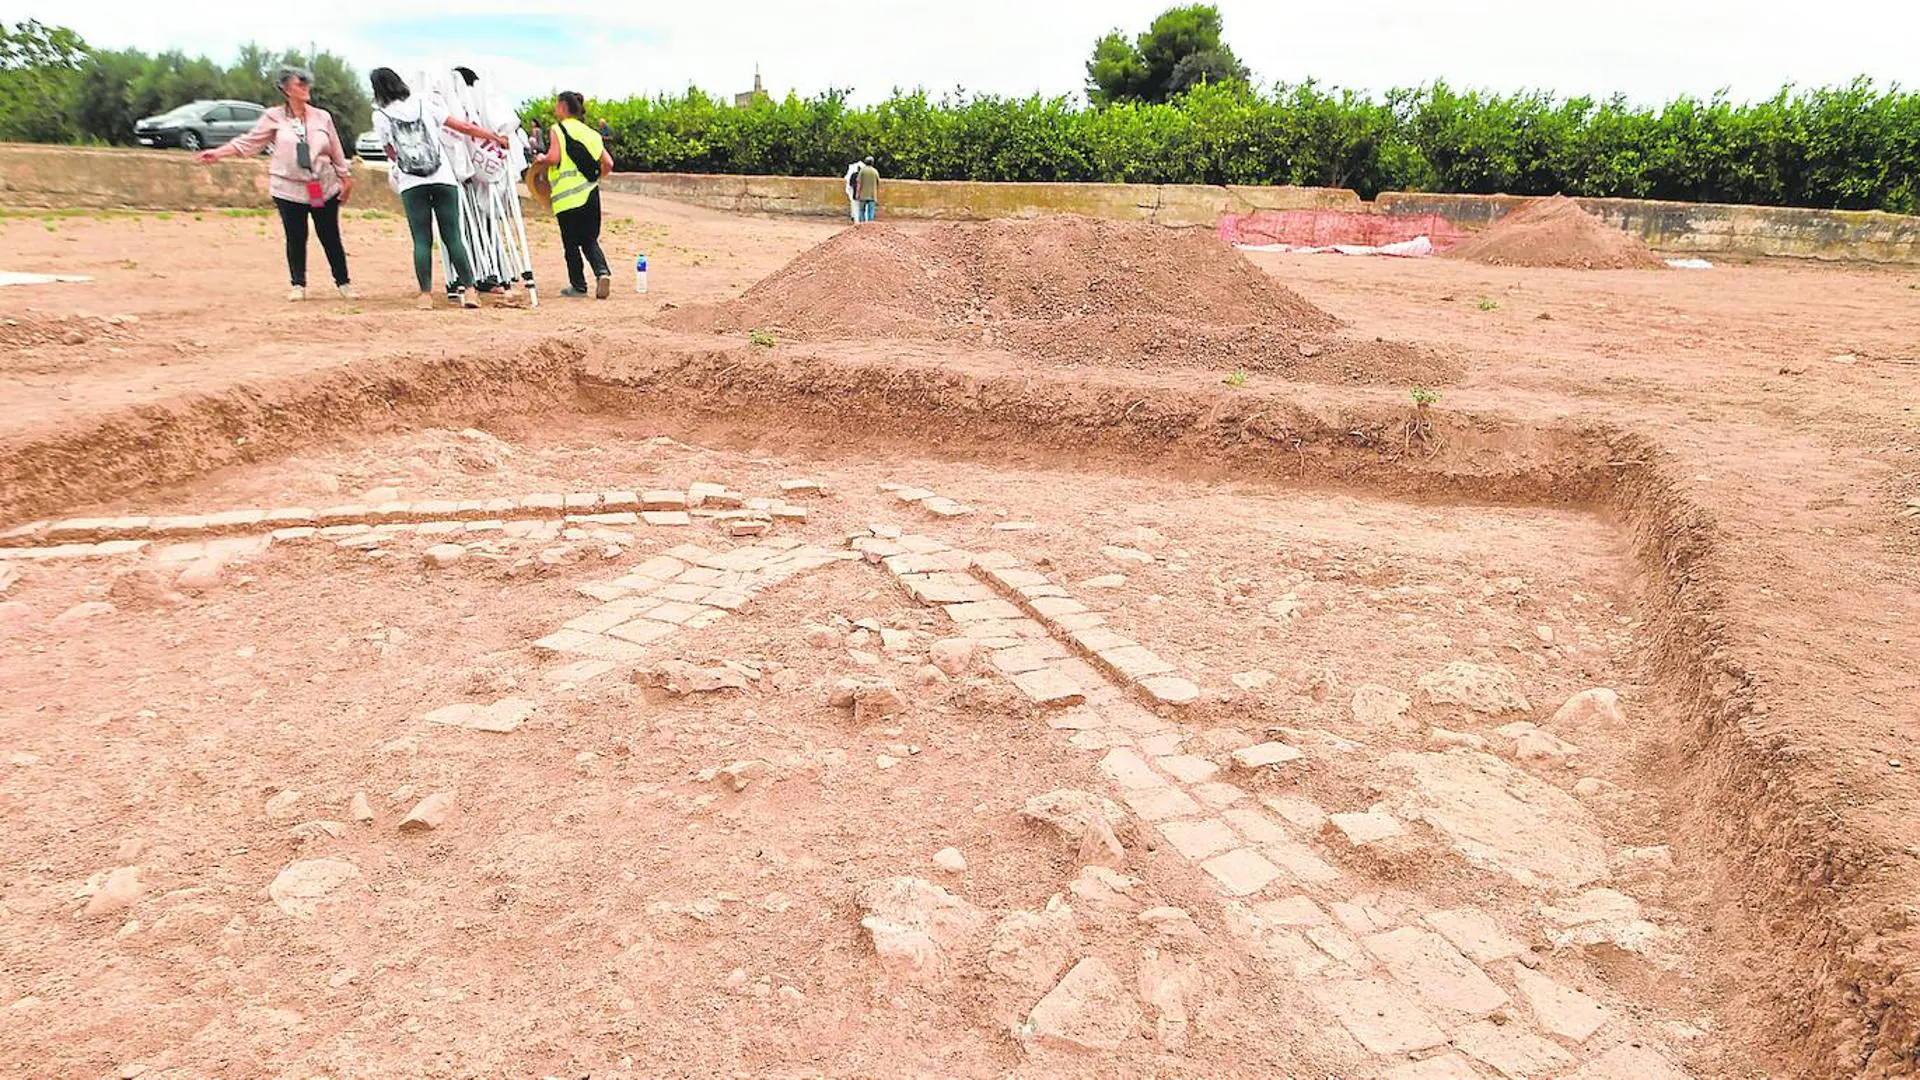 Archaeologists discover an Islamic garden in Murcia in what was believed to be an irrigation pond